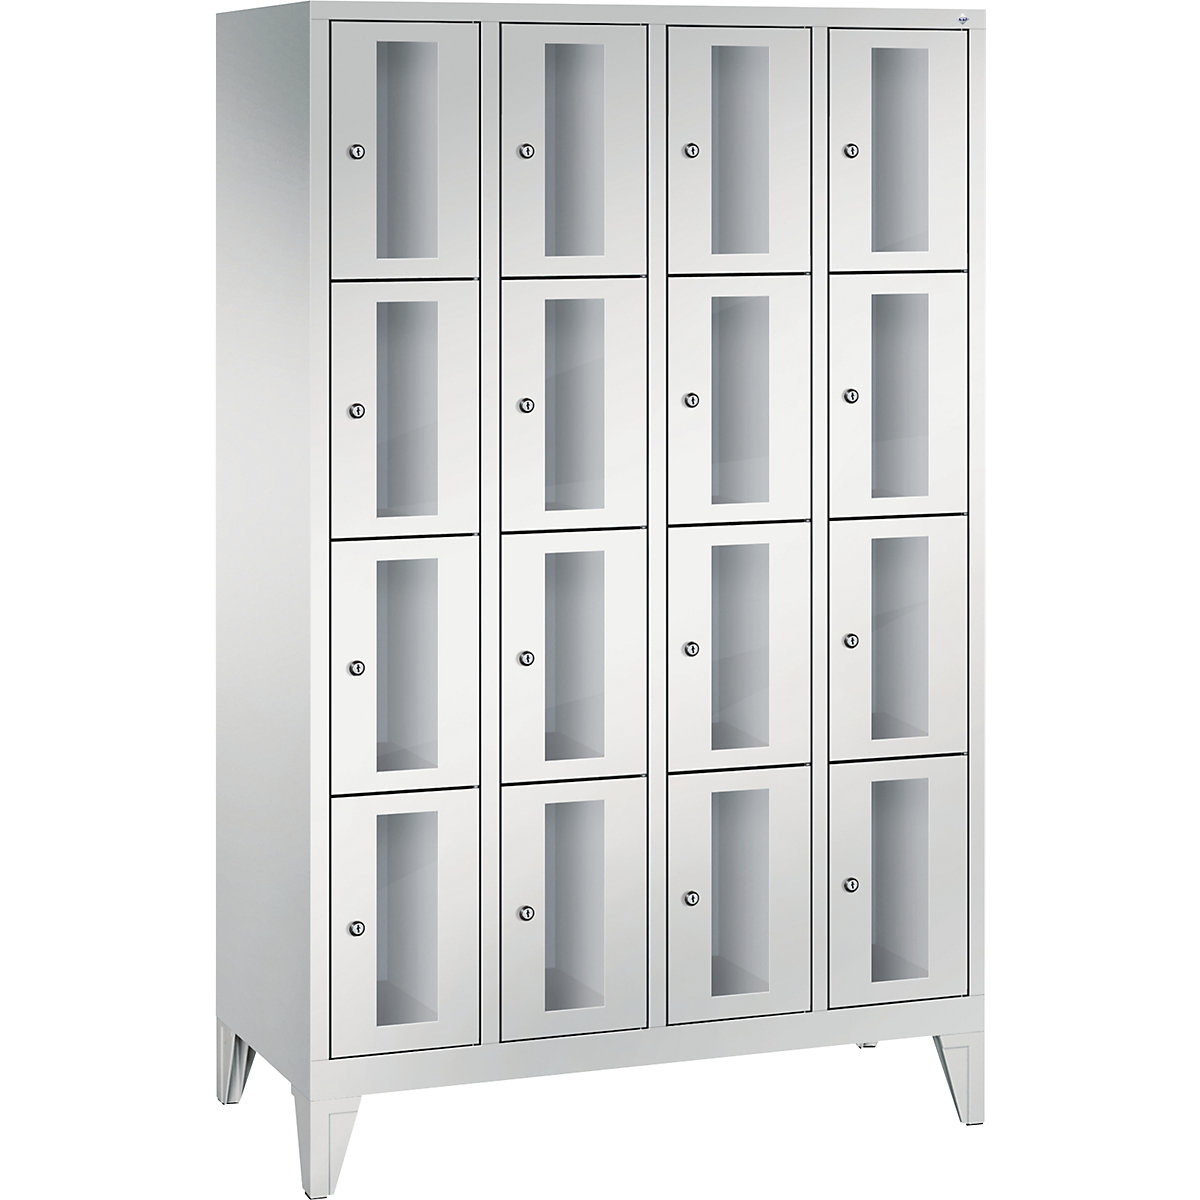 CLASSIC locker unit, compartment height 375 mm, with feet - C+P